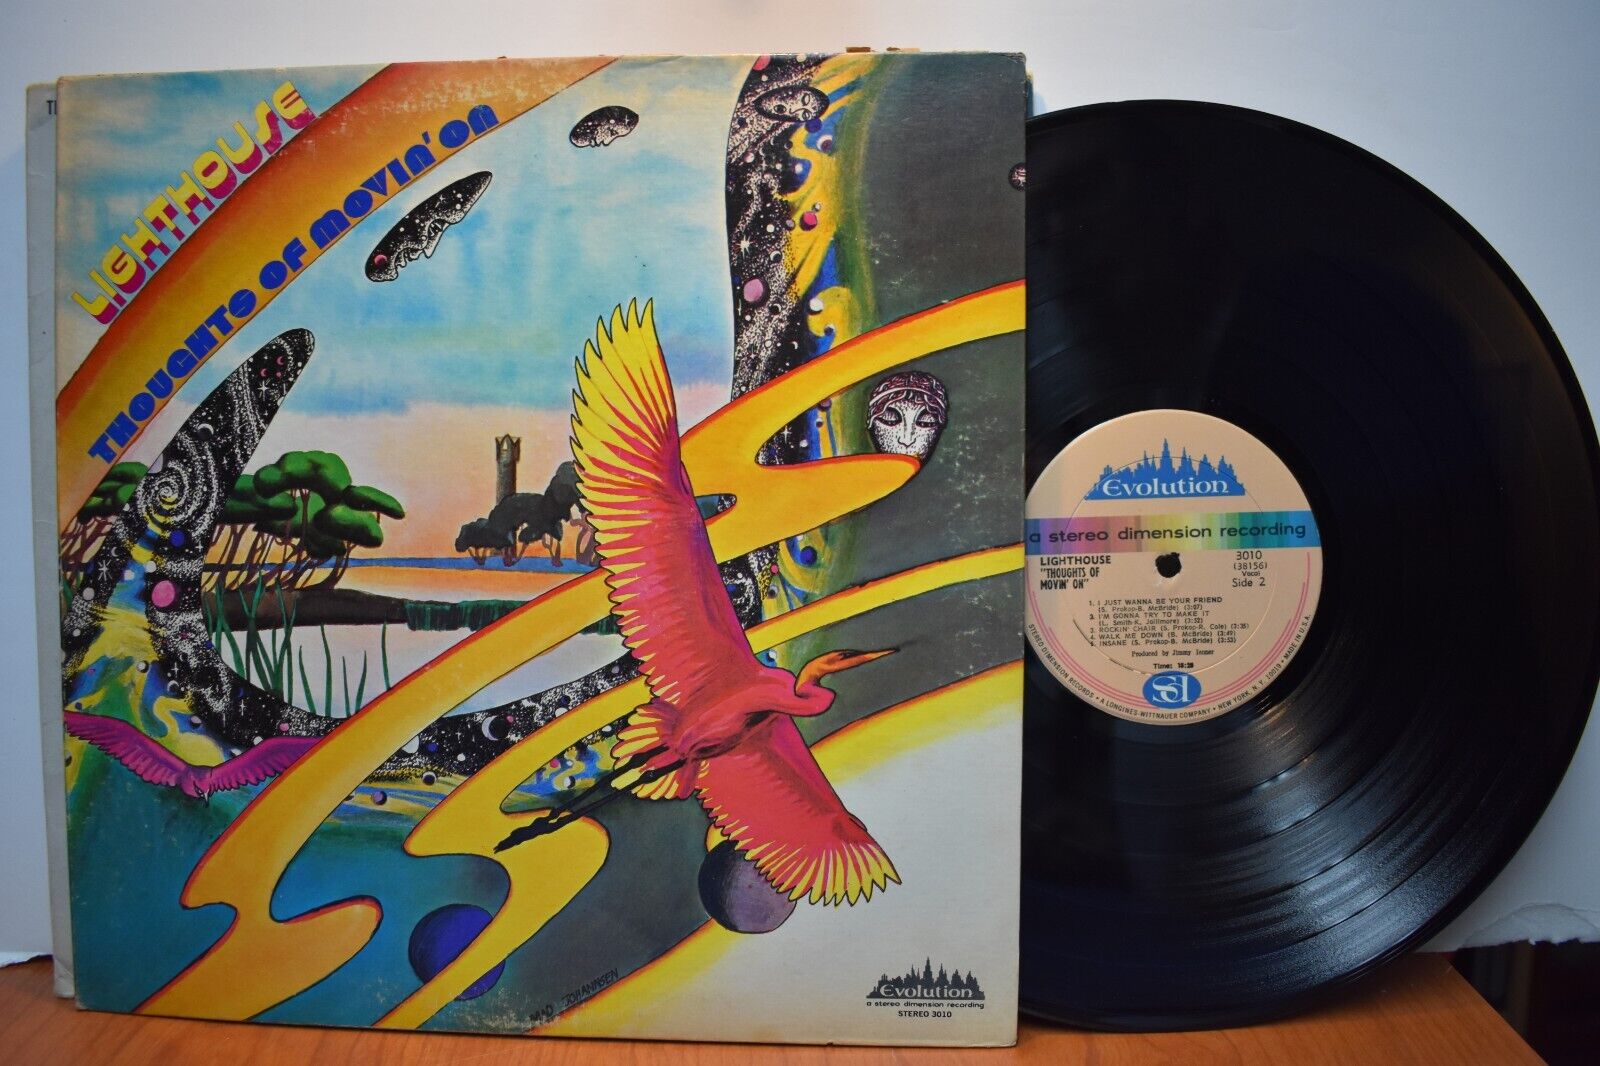 Lighthouse Thoughts Of Movin’ On LP Stereo Dimension 3010 Stereo Gatefold